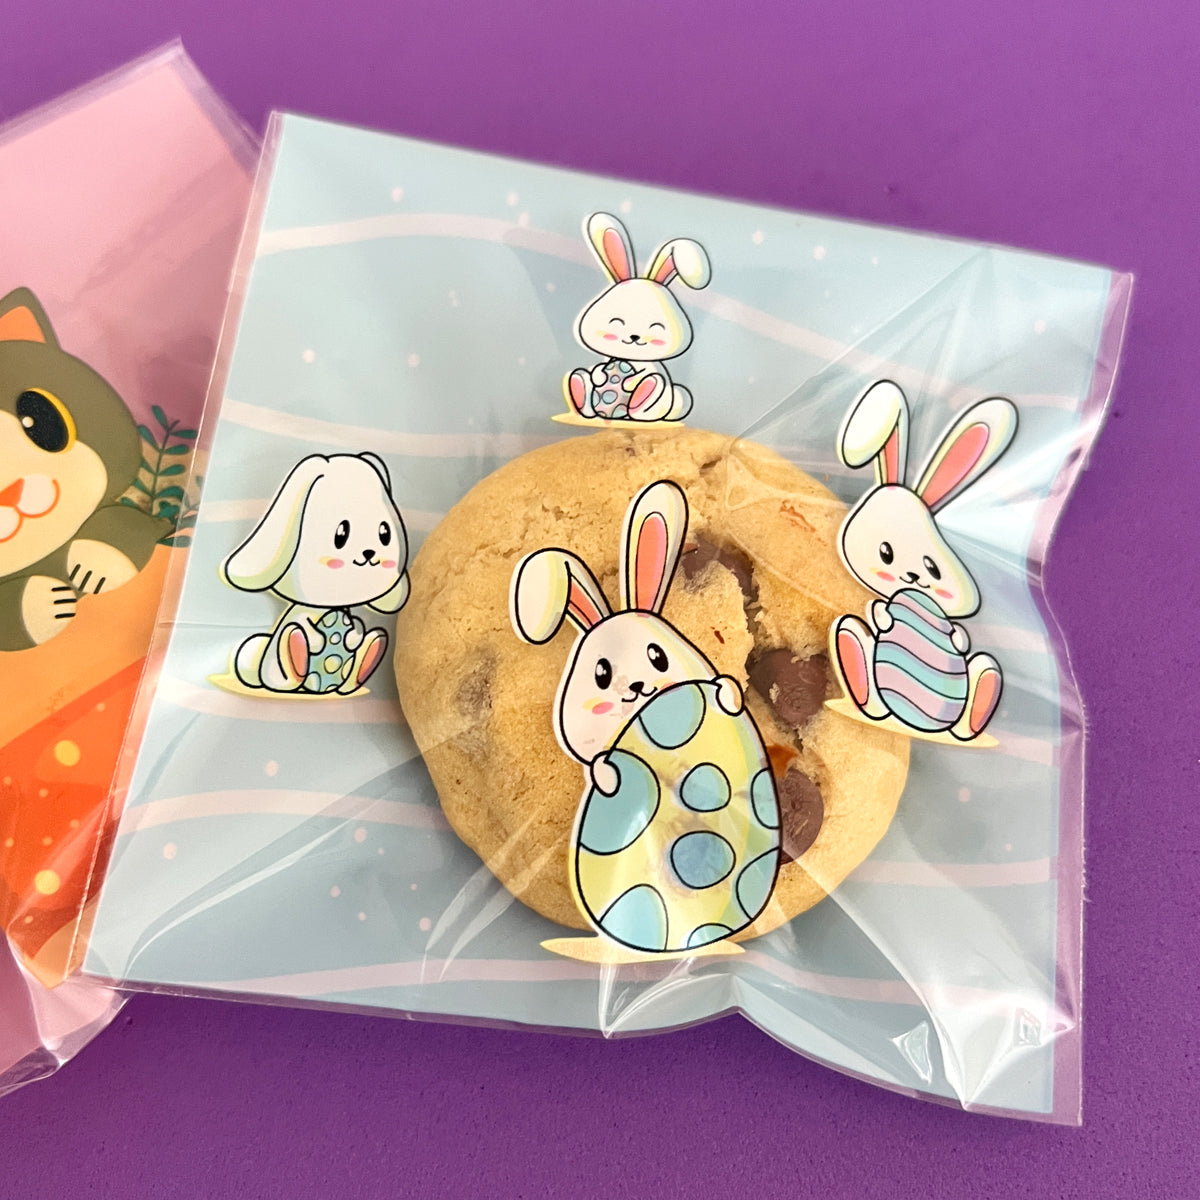 Wrapables Transparent Self-Adhesive 4" x 4" Candy and Cookie Bags, Favor Treat Bags for Parties and Wedding (200pcs)